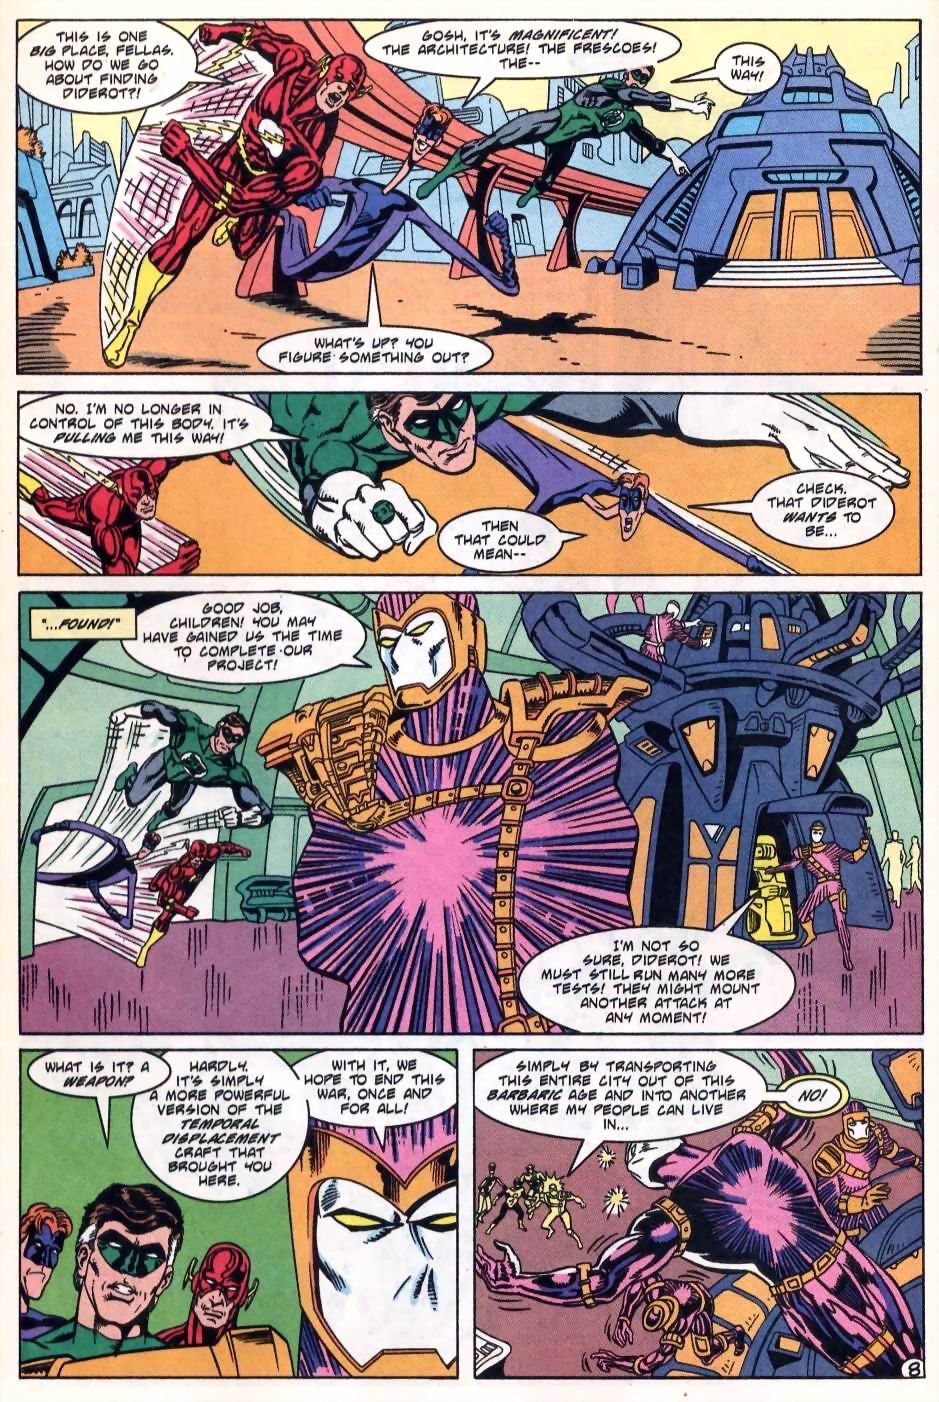 Justice League International (1993) 55 Page 9